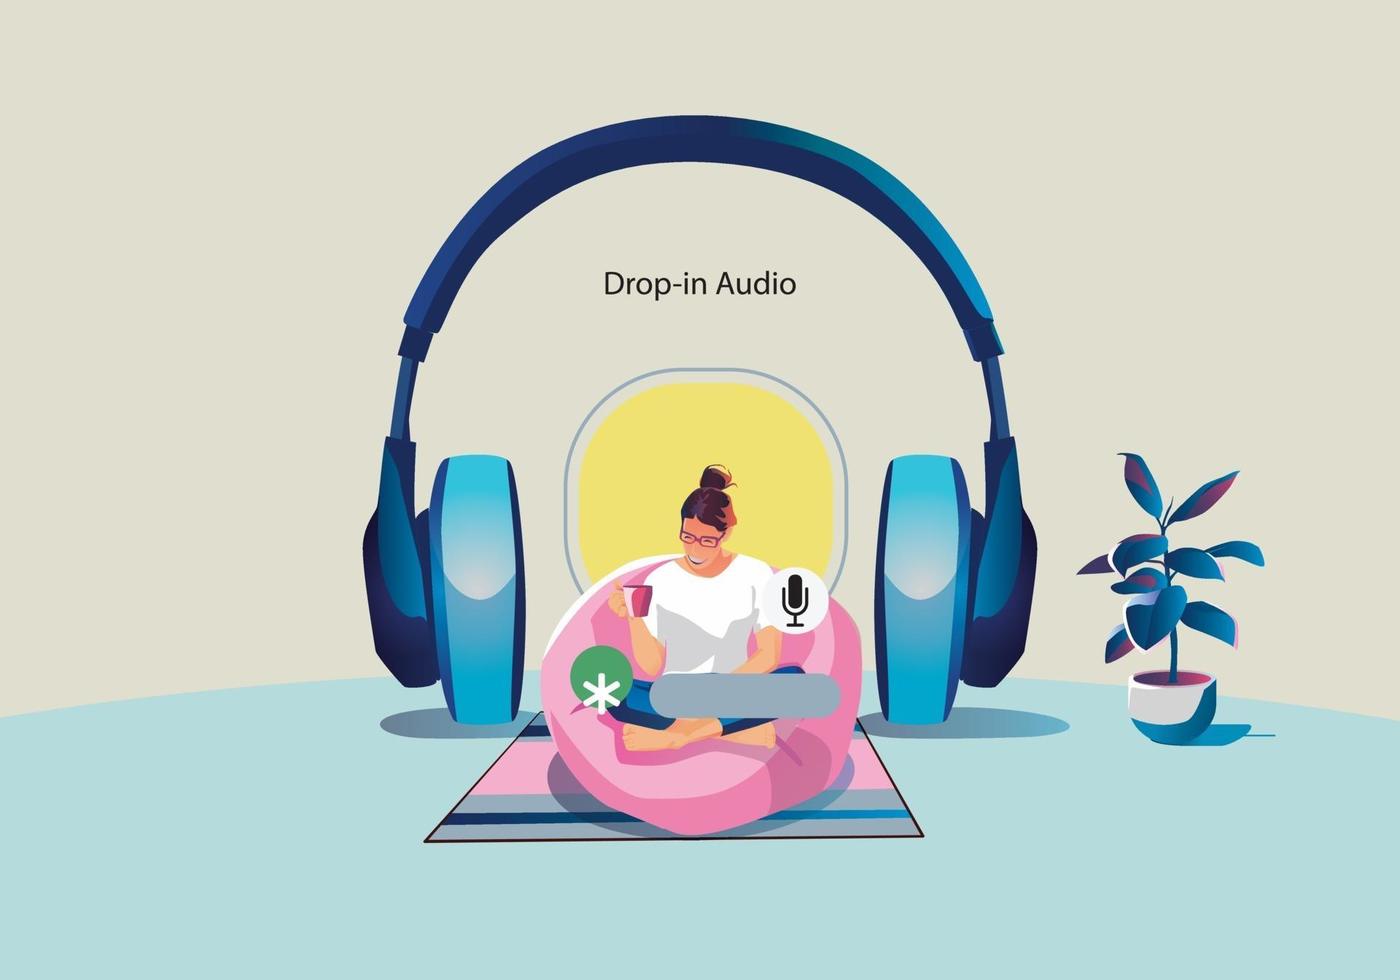 One woman uses headphones, listens to a smartphone vector